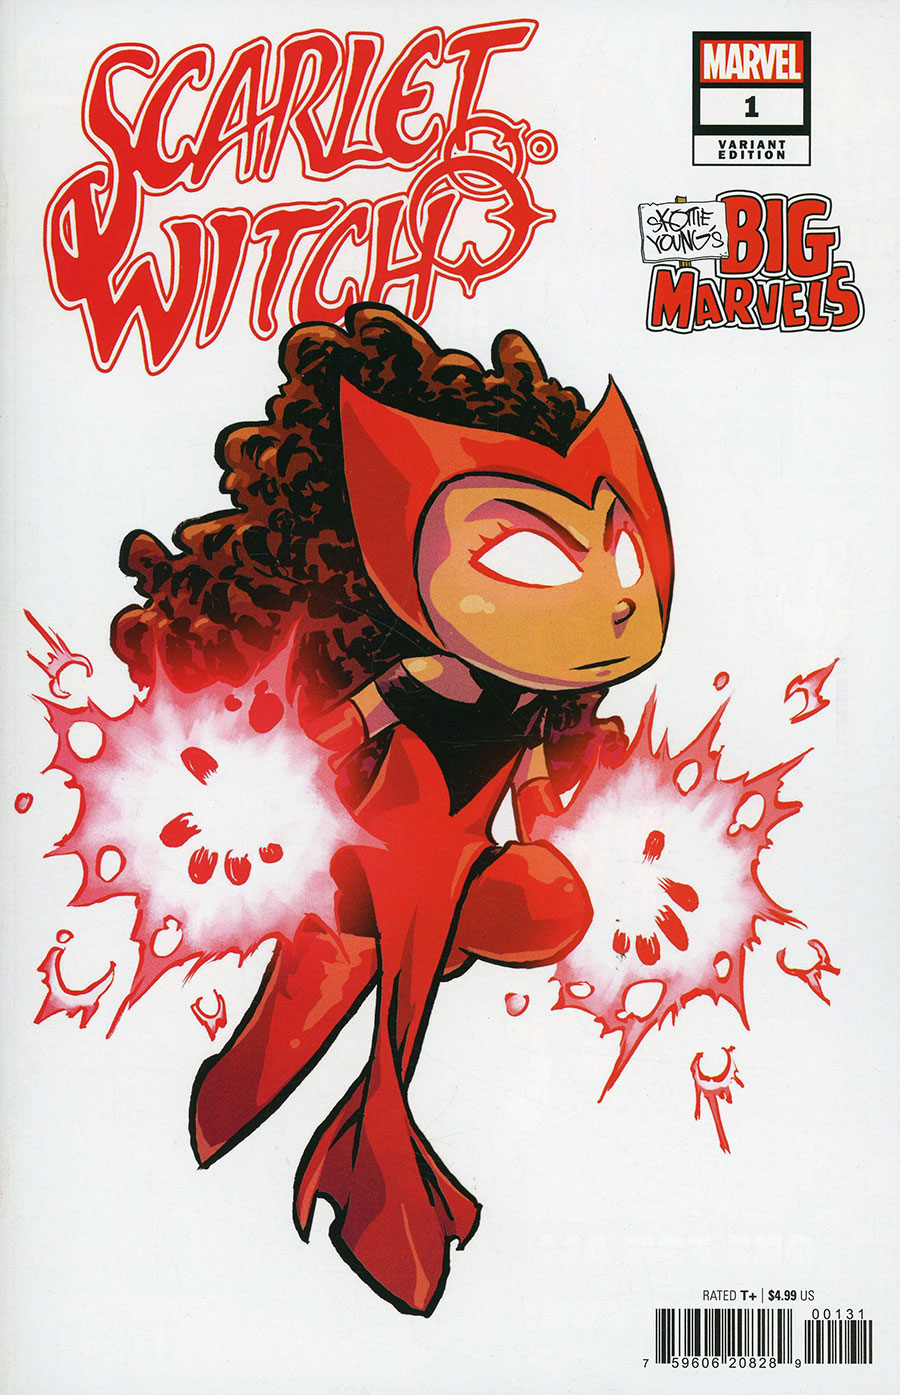 Scarlet Witch Vol 4 #1 Cover B Variant Skottie Youngs Big Marvels Cover